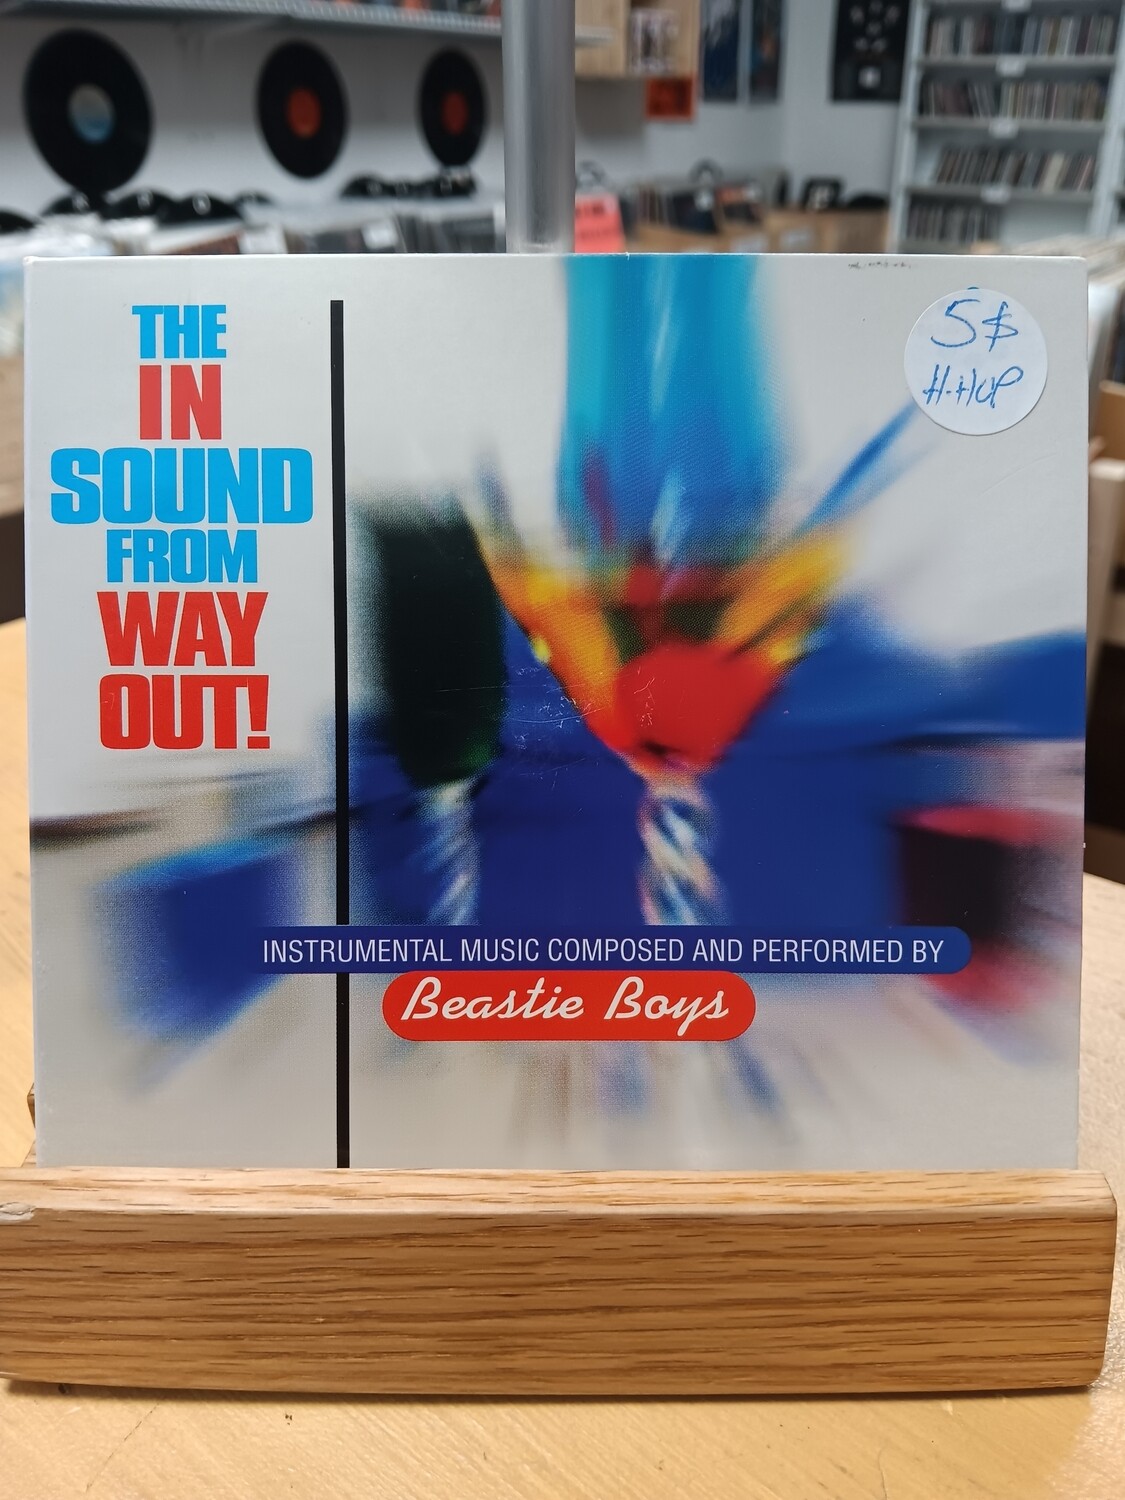 Beastie Boys - The In Sound from Way Out (CD)